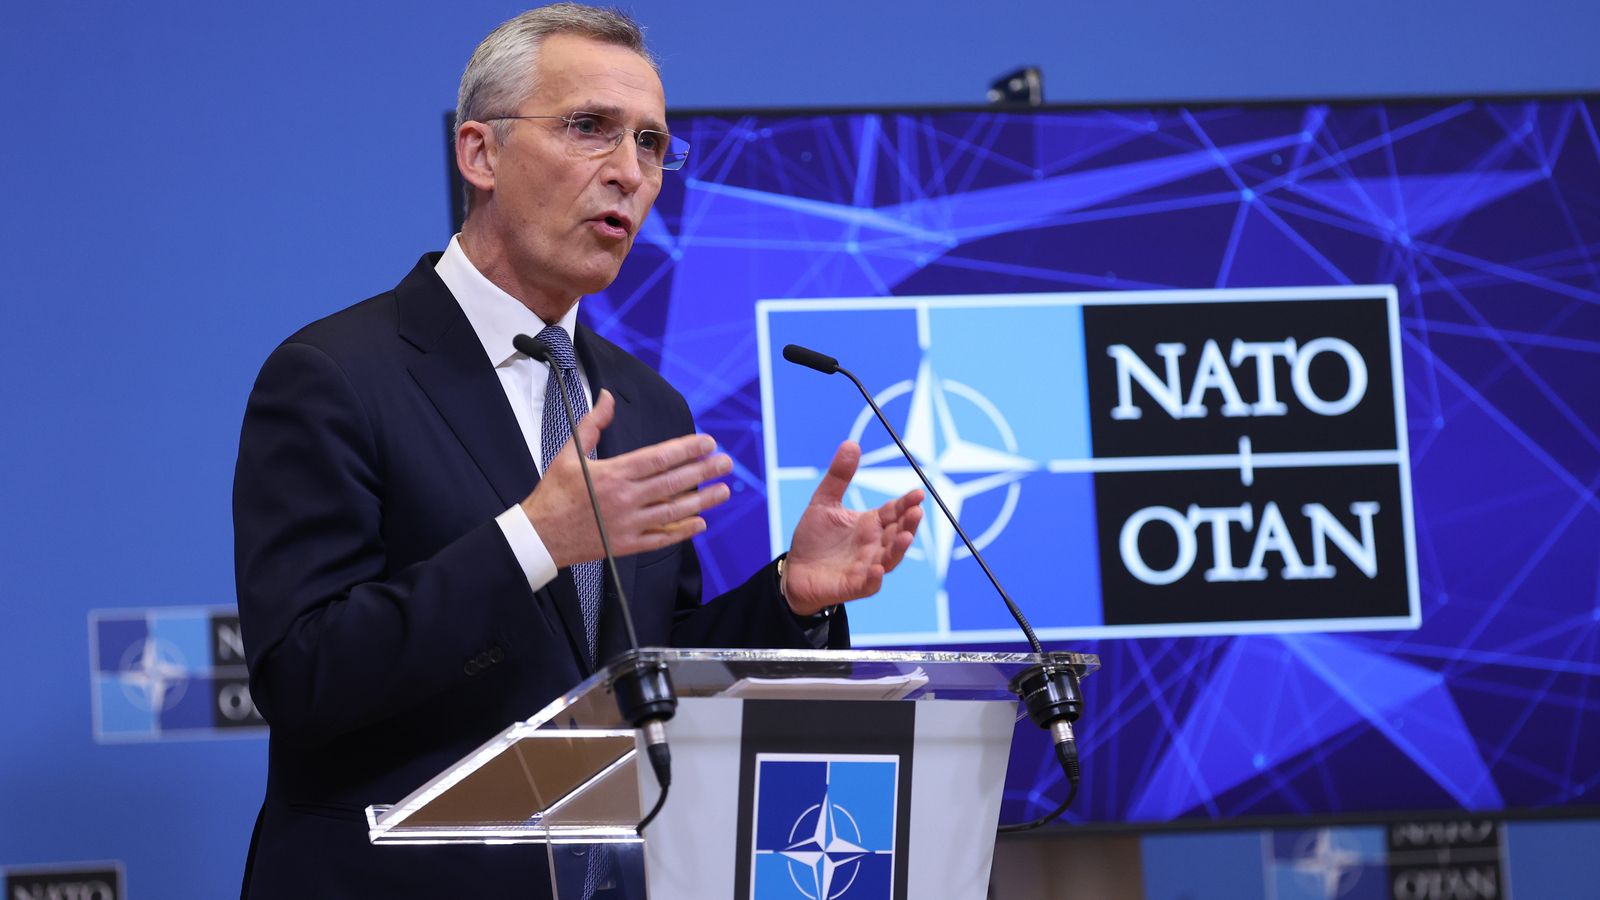 NATO reveals how it will operate in outer space